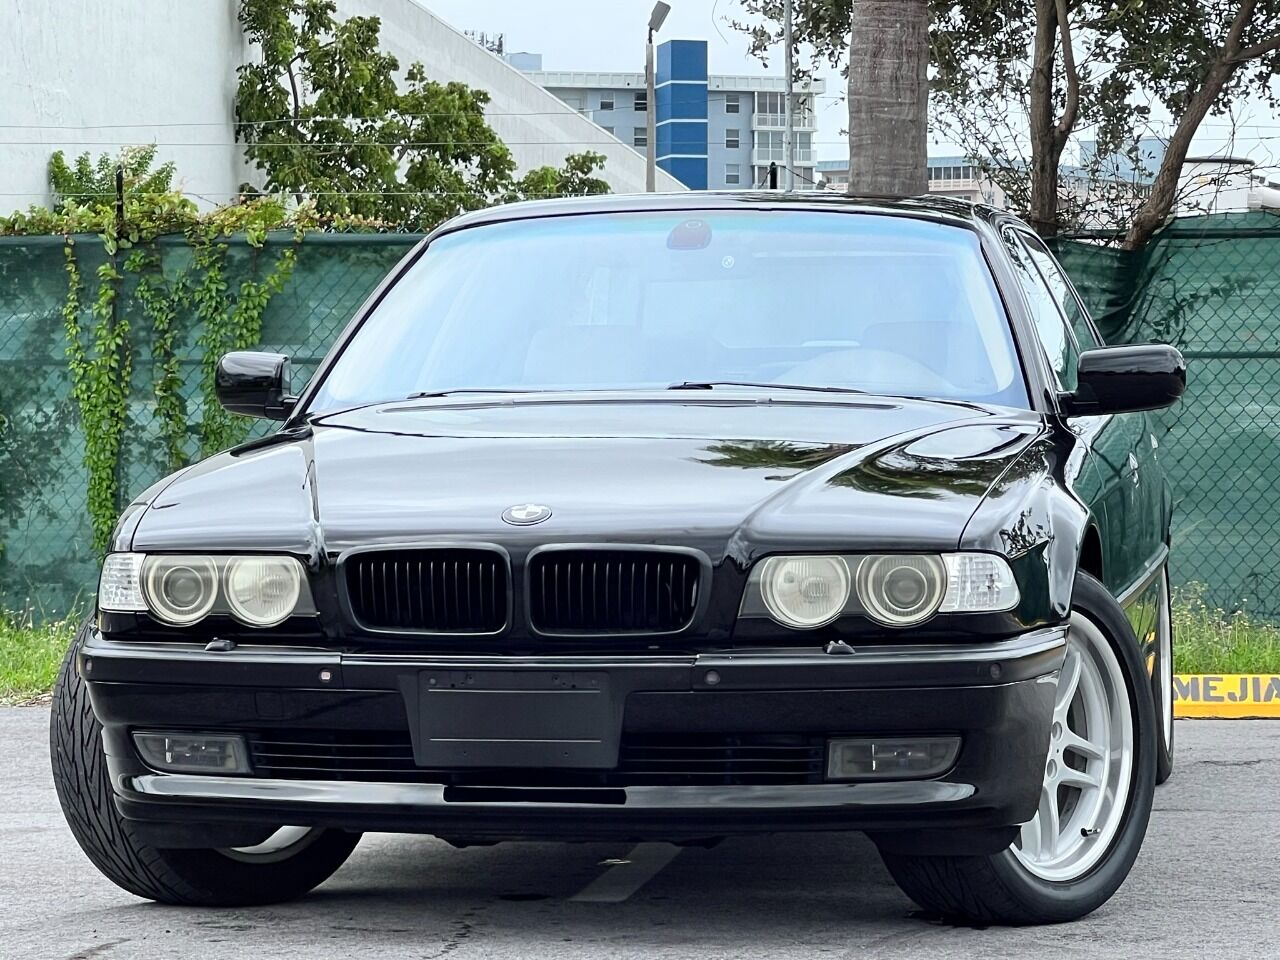 2000 BMW 7 Series For Sale - Carsforsale.com®